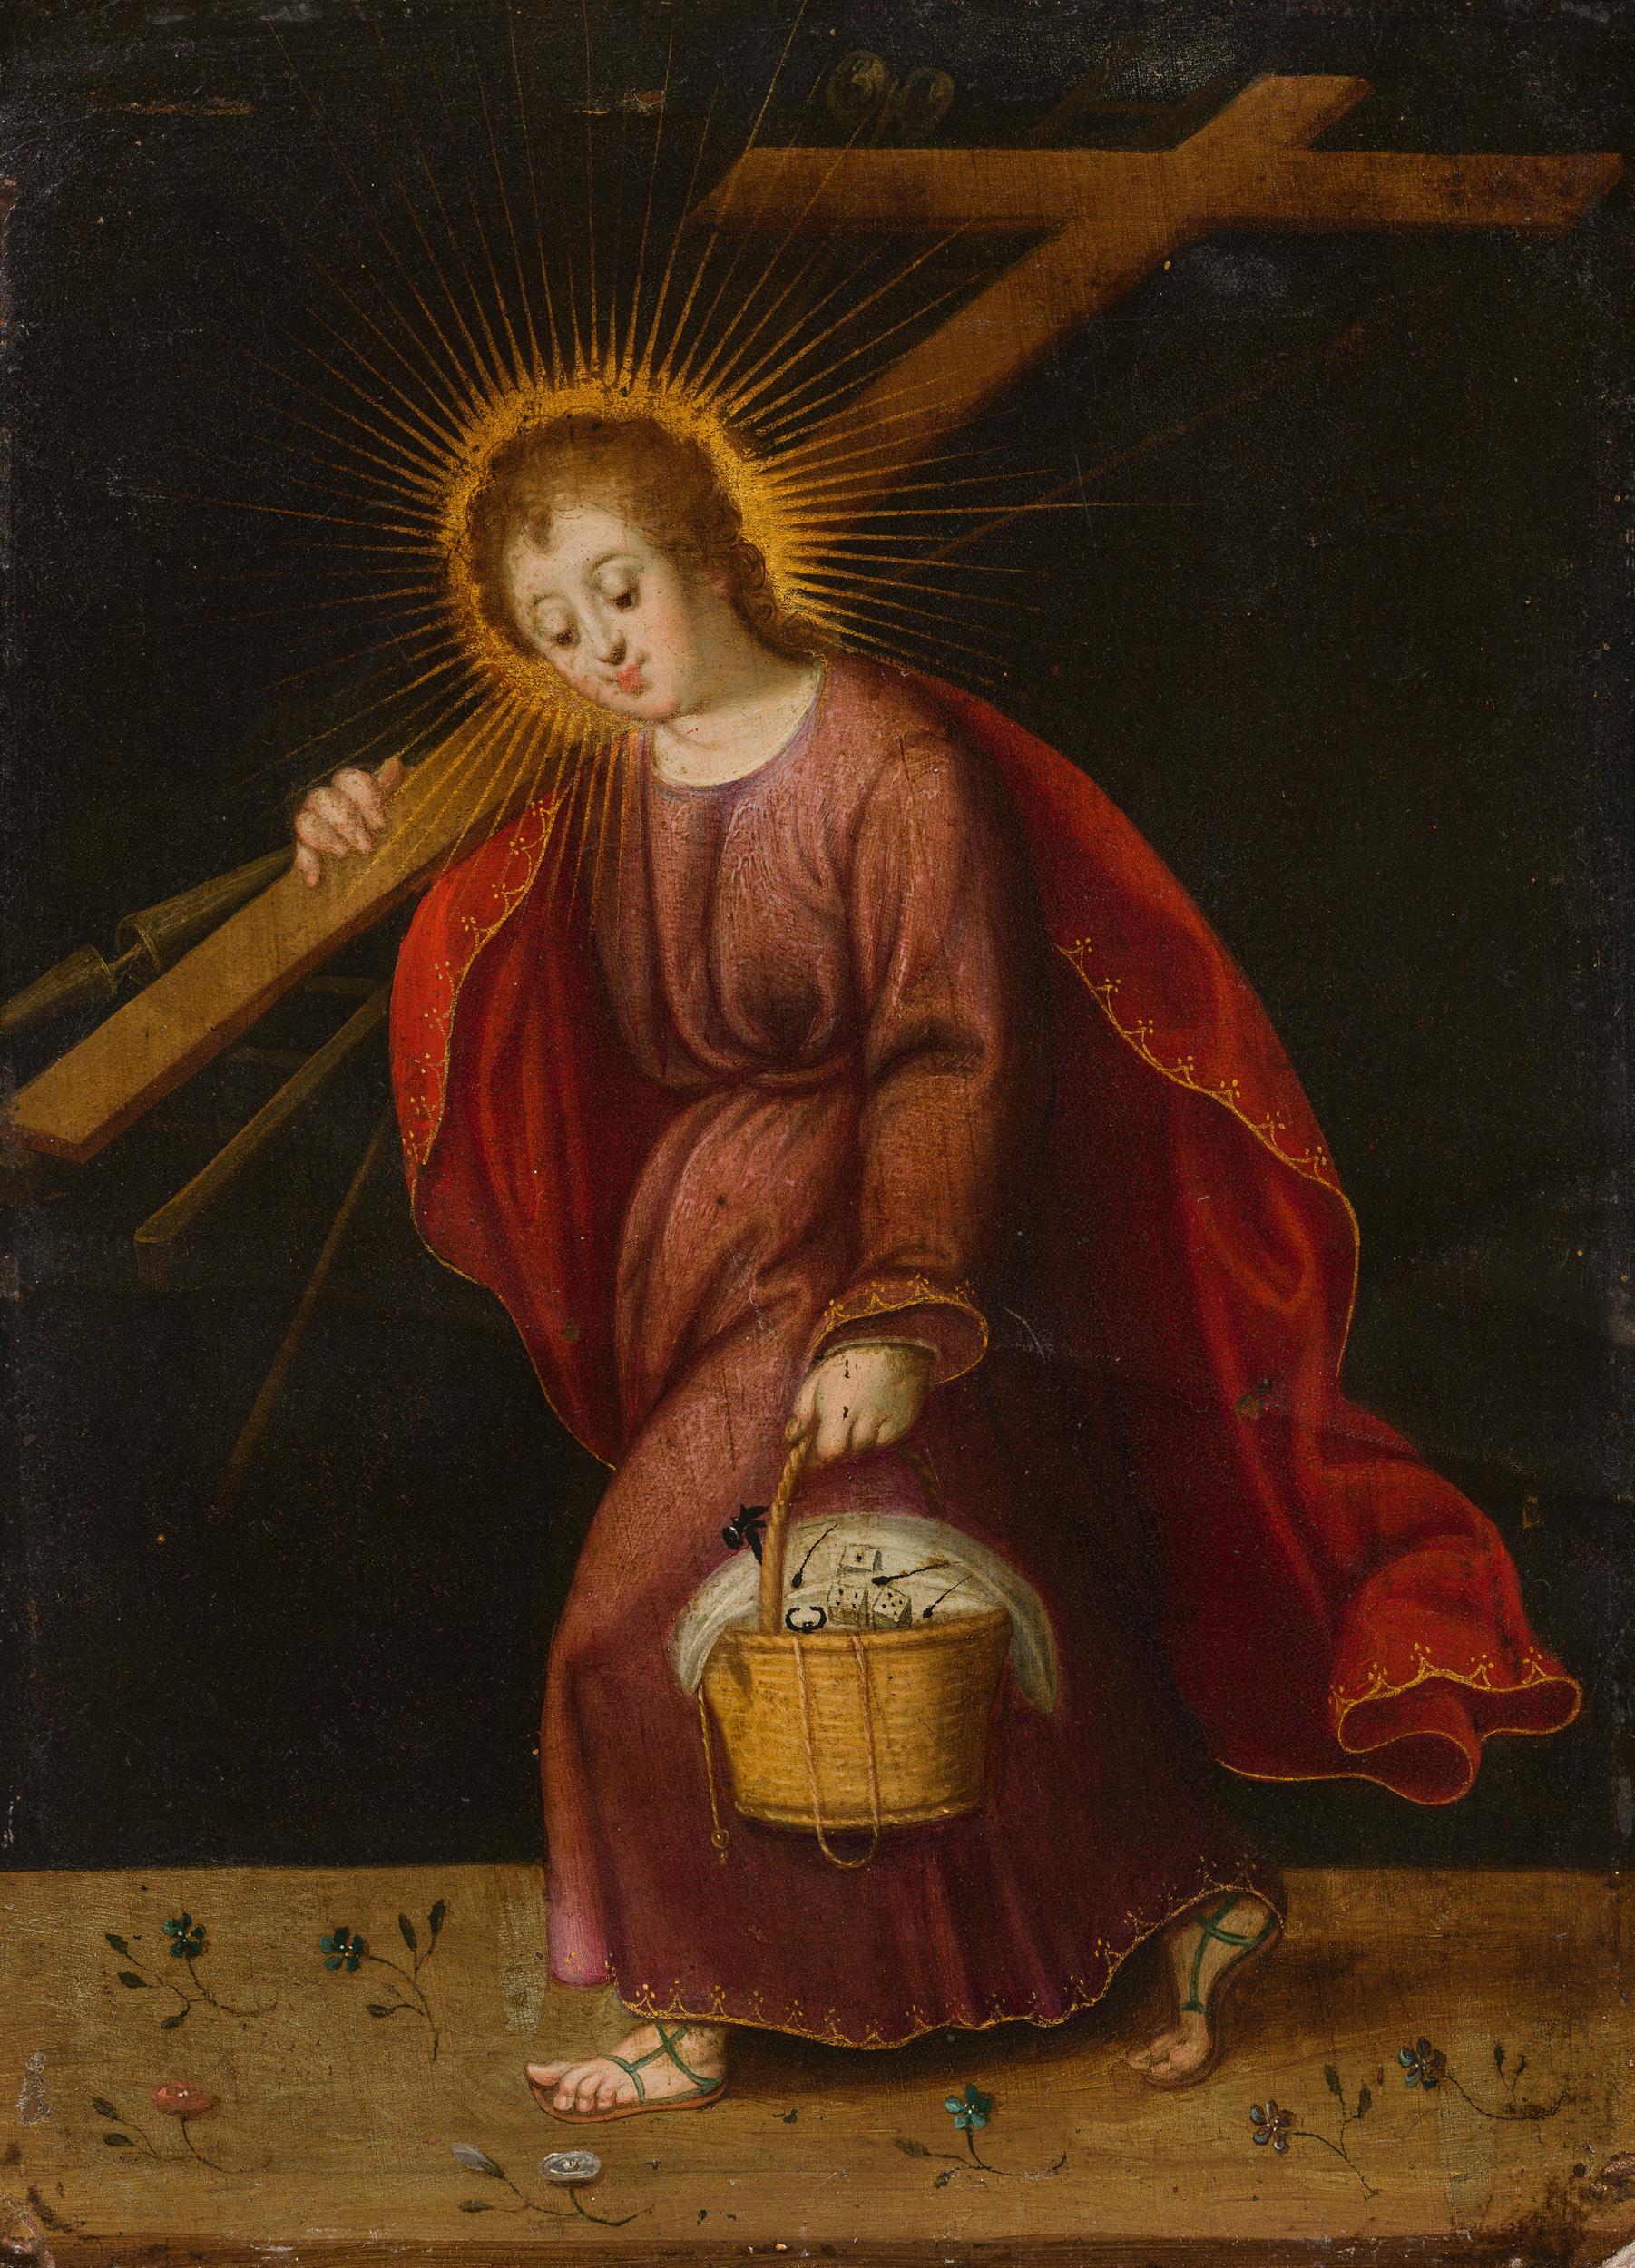 Flemish School: Christ Child with the instruments of the Passion